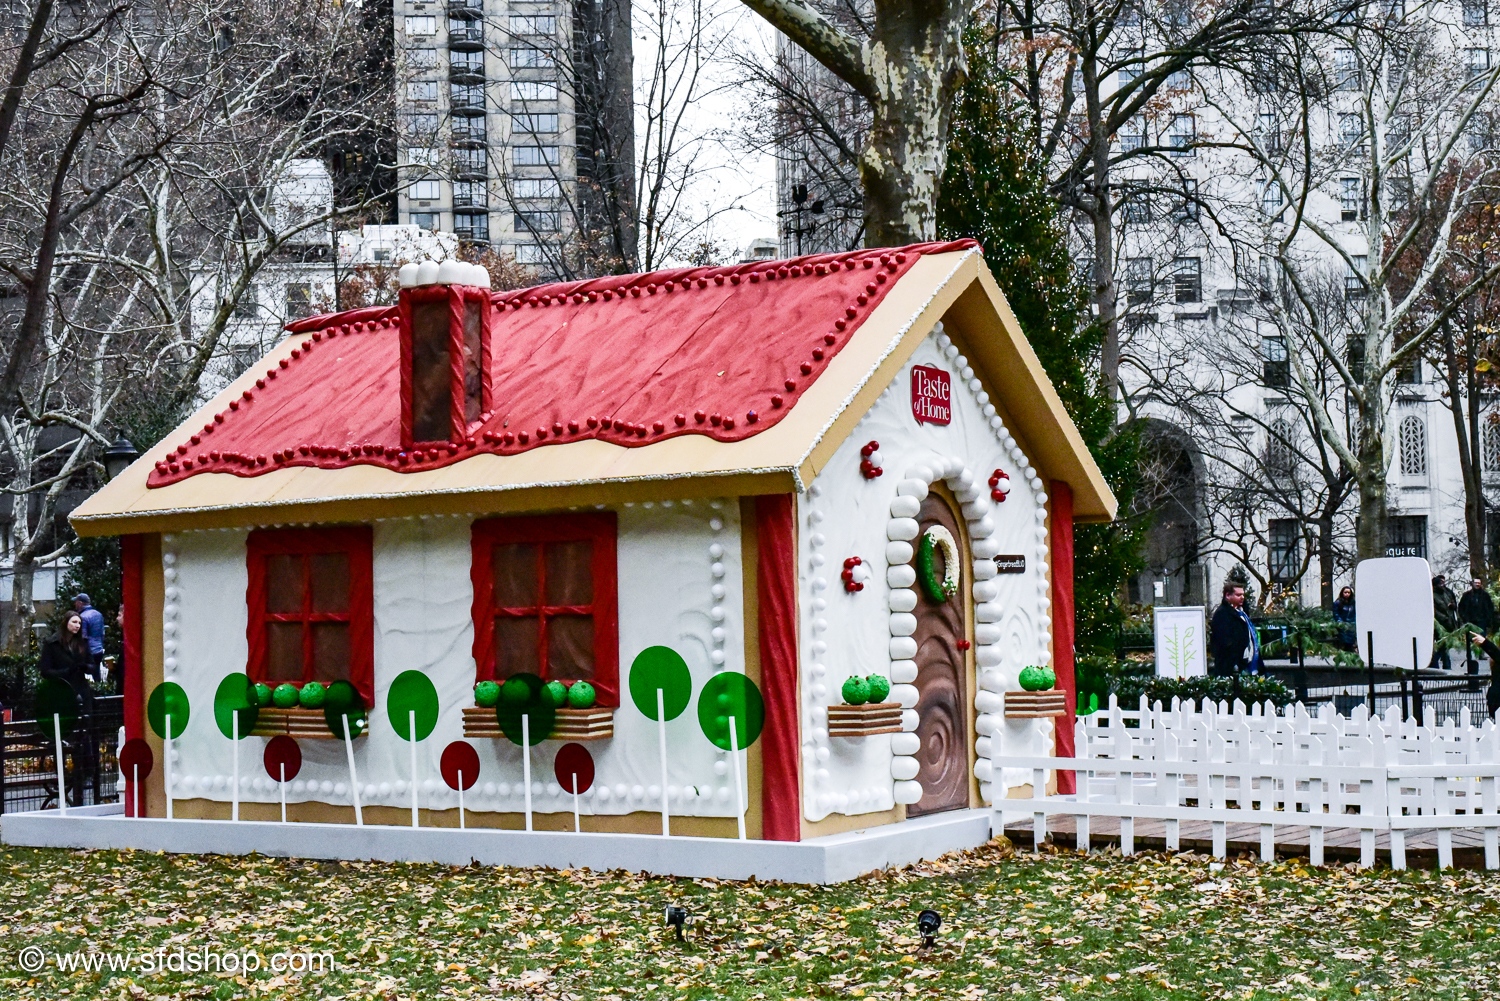 Taste of Home Gingerbread Blvd 2017 fabricated by SFDS-20.jpg